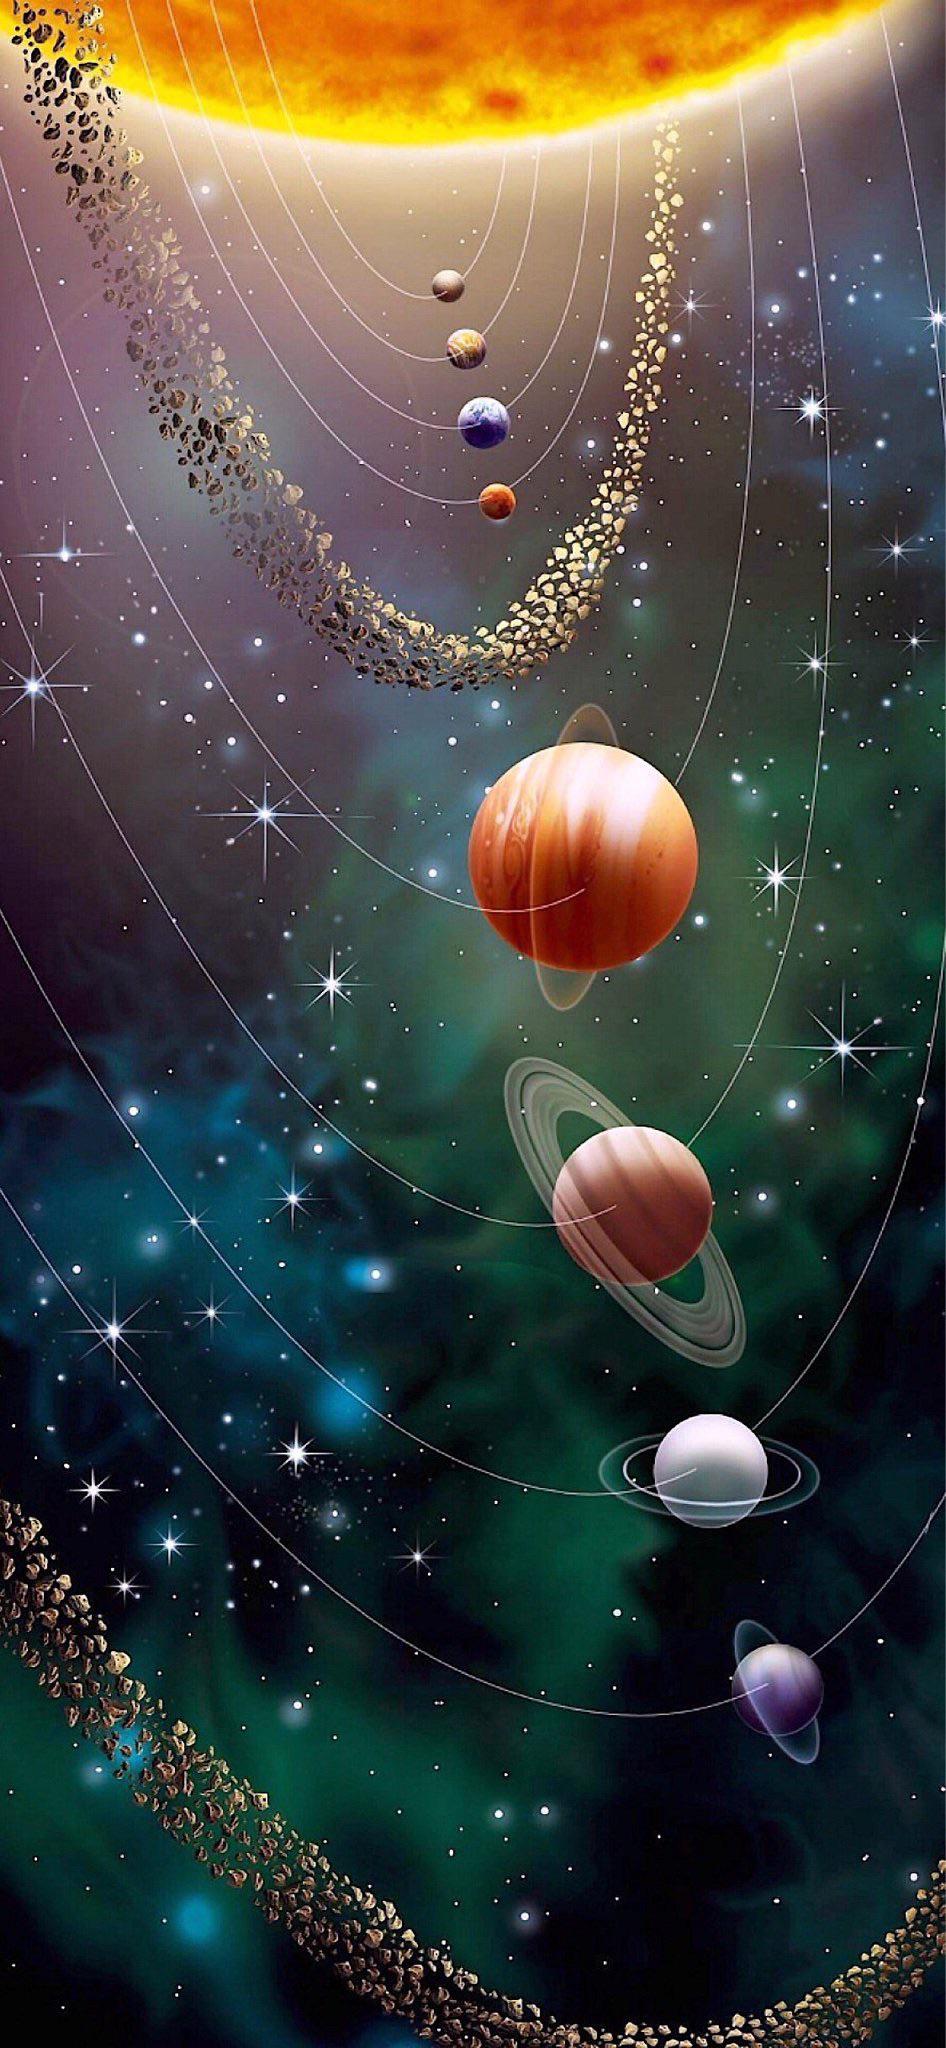 Solar System Wallpaper for iPhone X. iPhone X Wallpaper